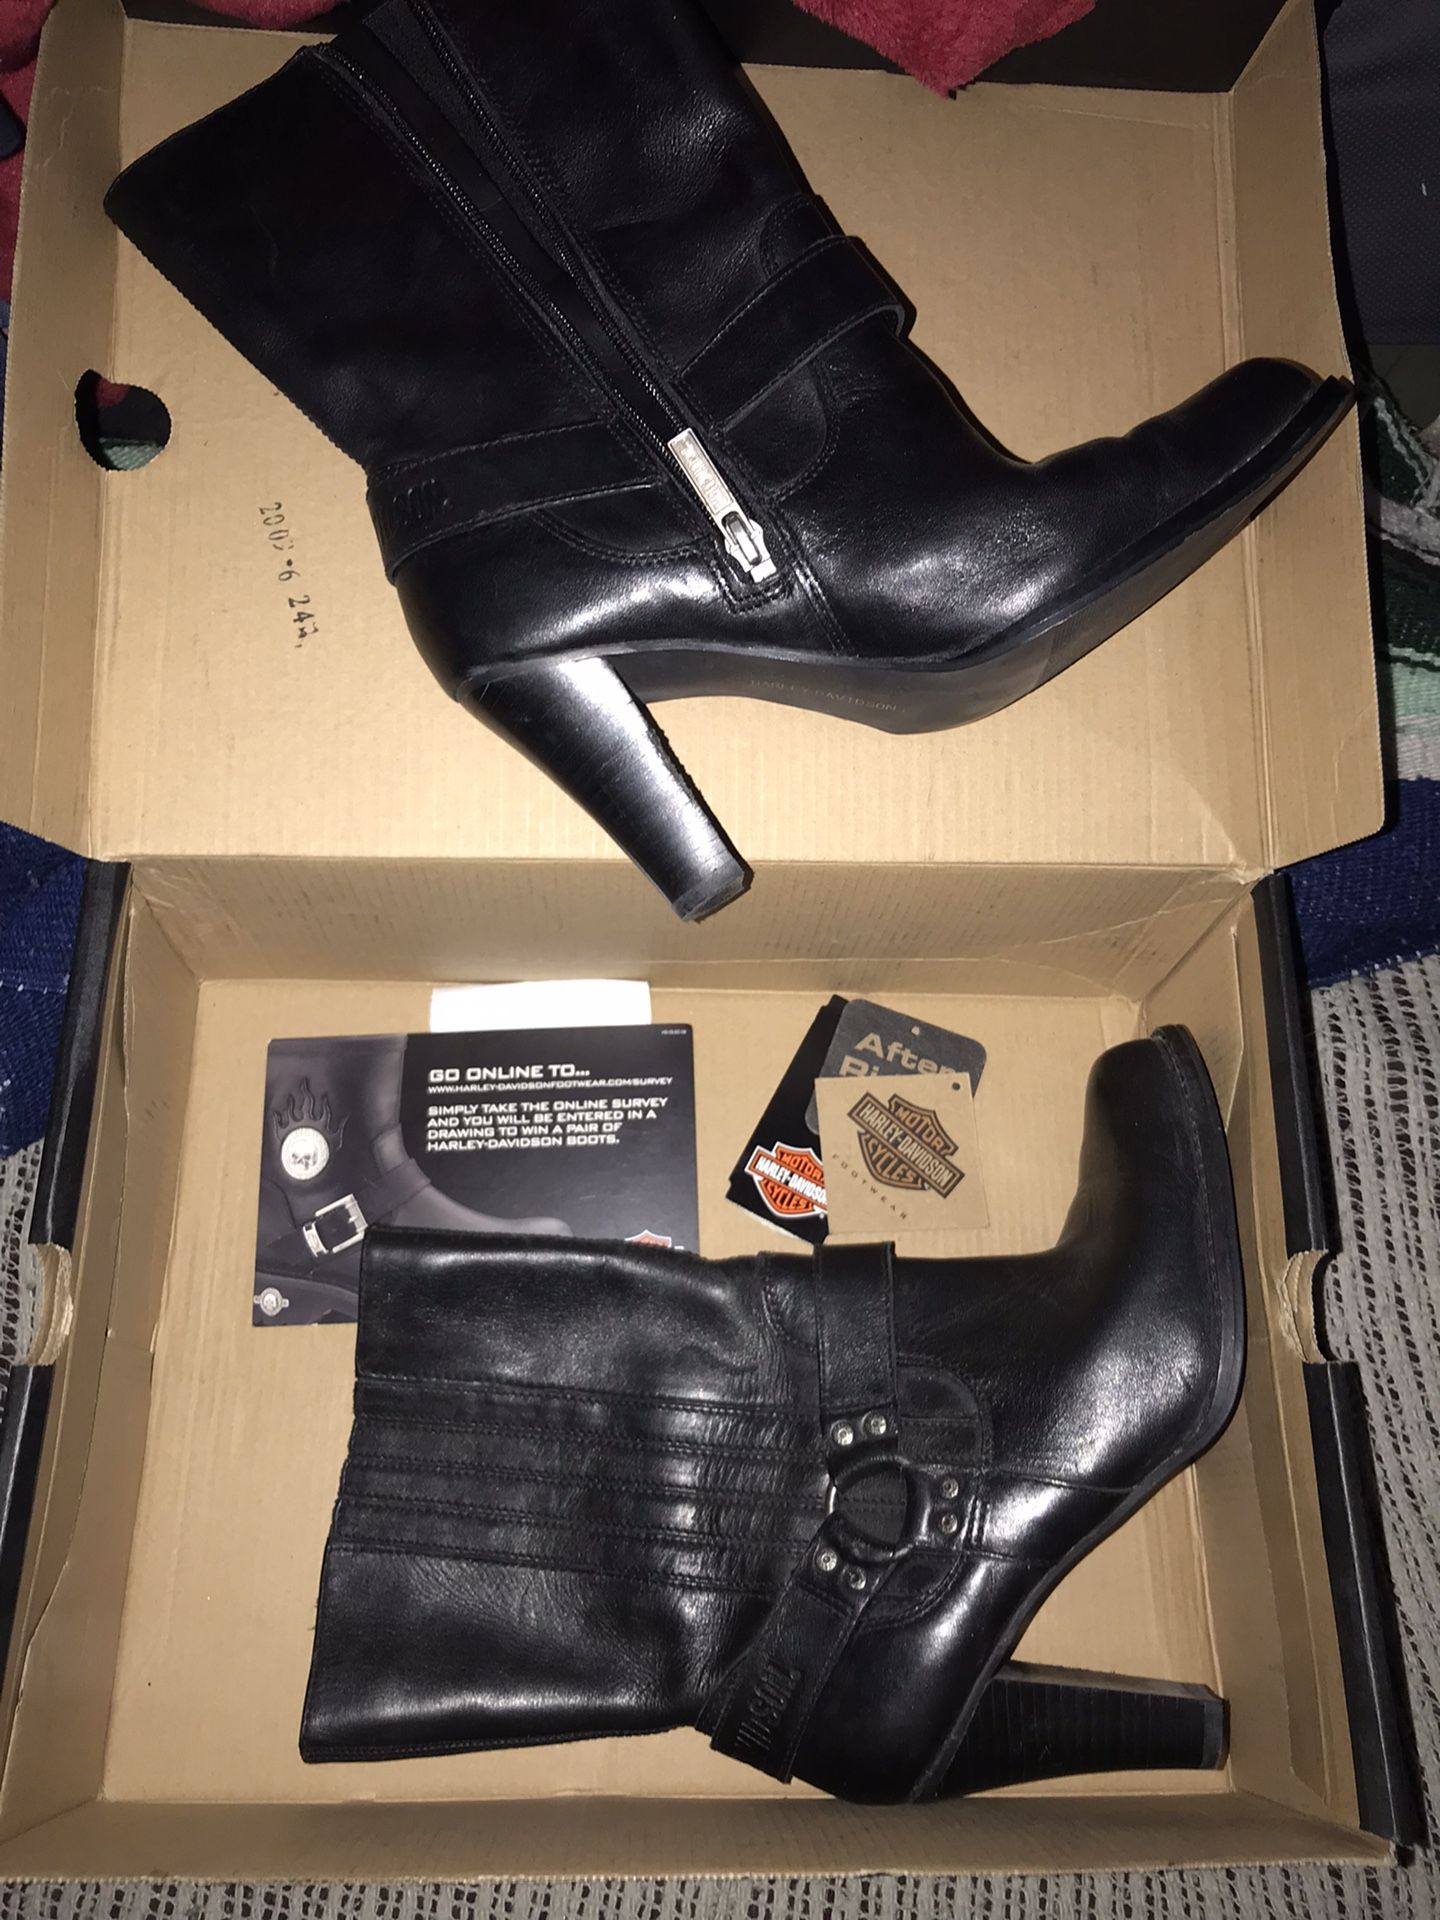 New Women’s Leather Harley Davidson Boots Size 8 1/2 Please See Other Pictures Only $60 Firm